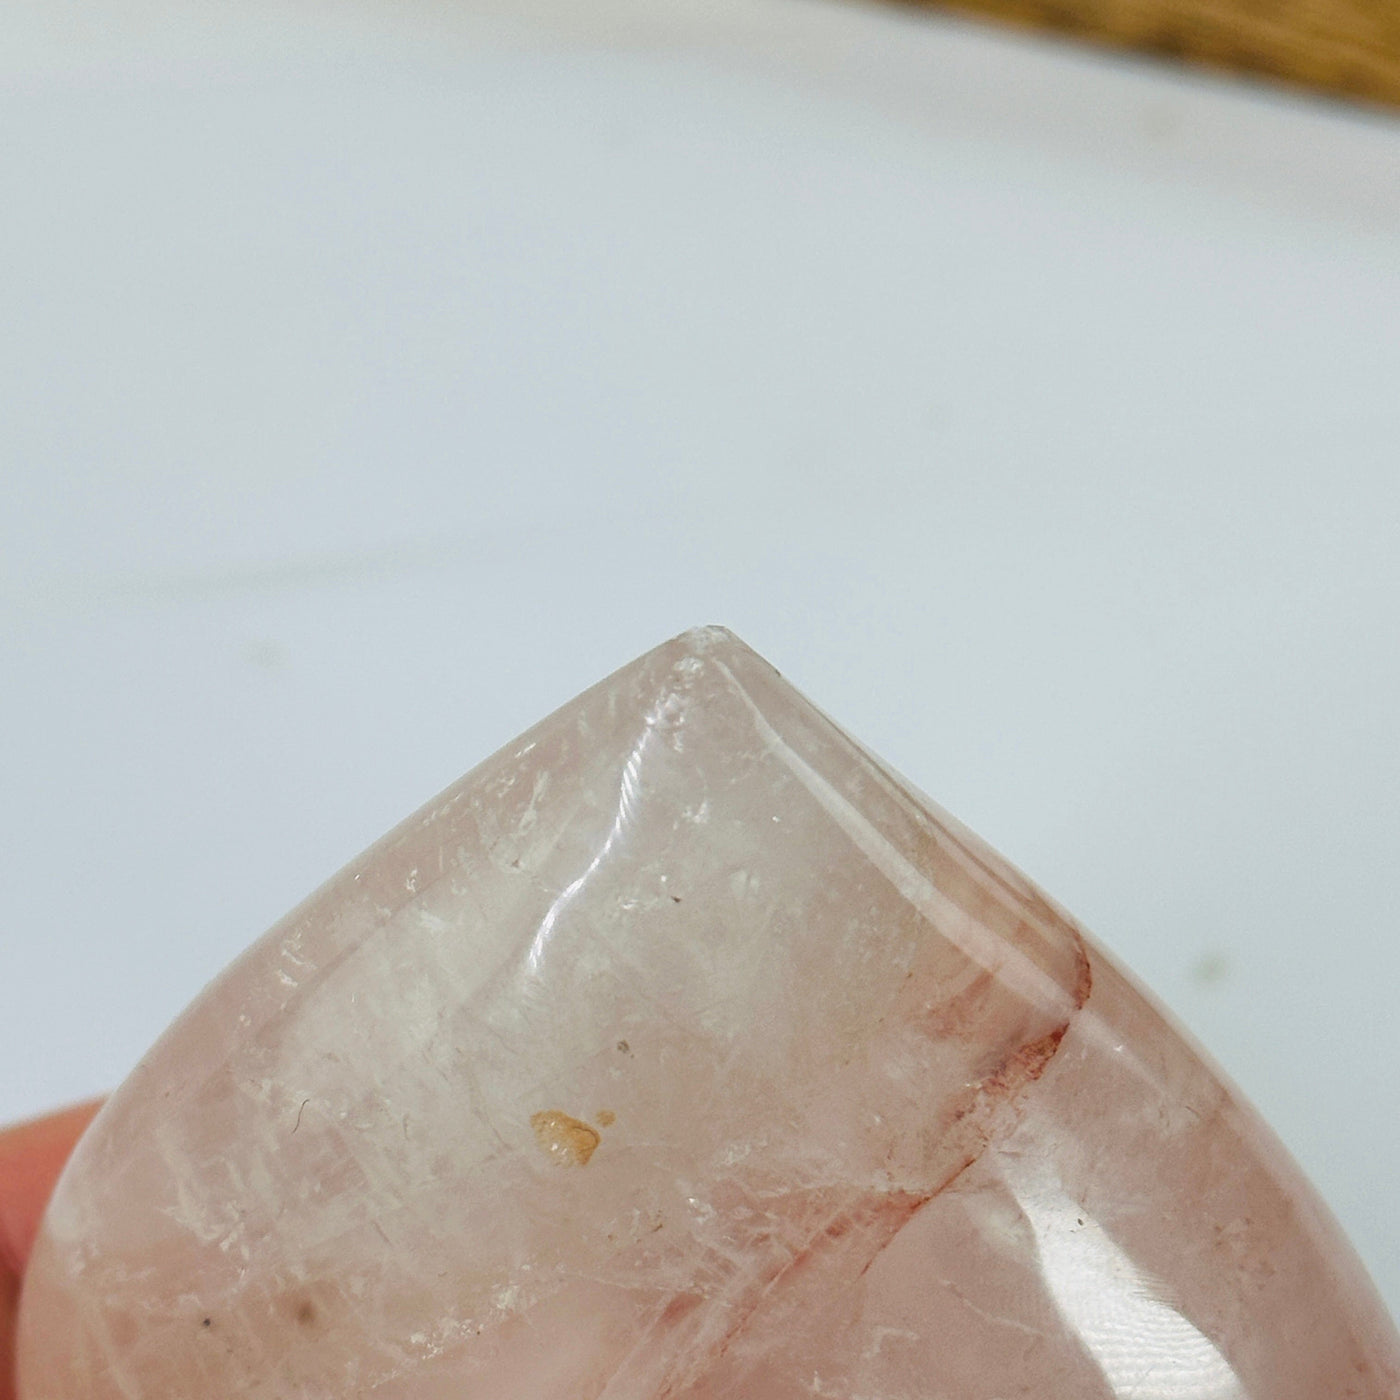 ROSE QUARTZ HEART WITH DECORATIONS IN THE BACKGROUND